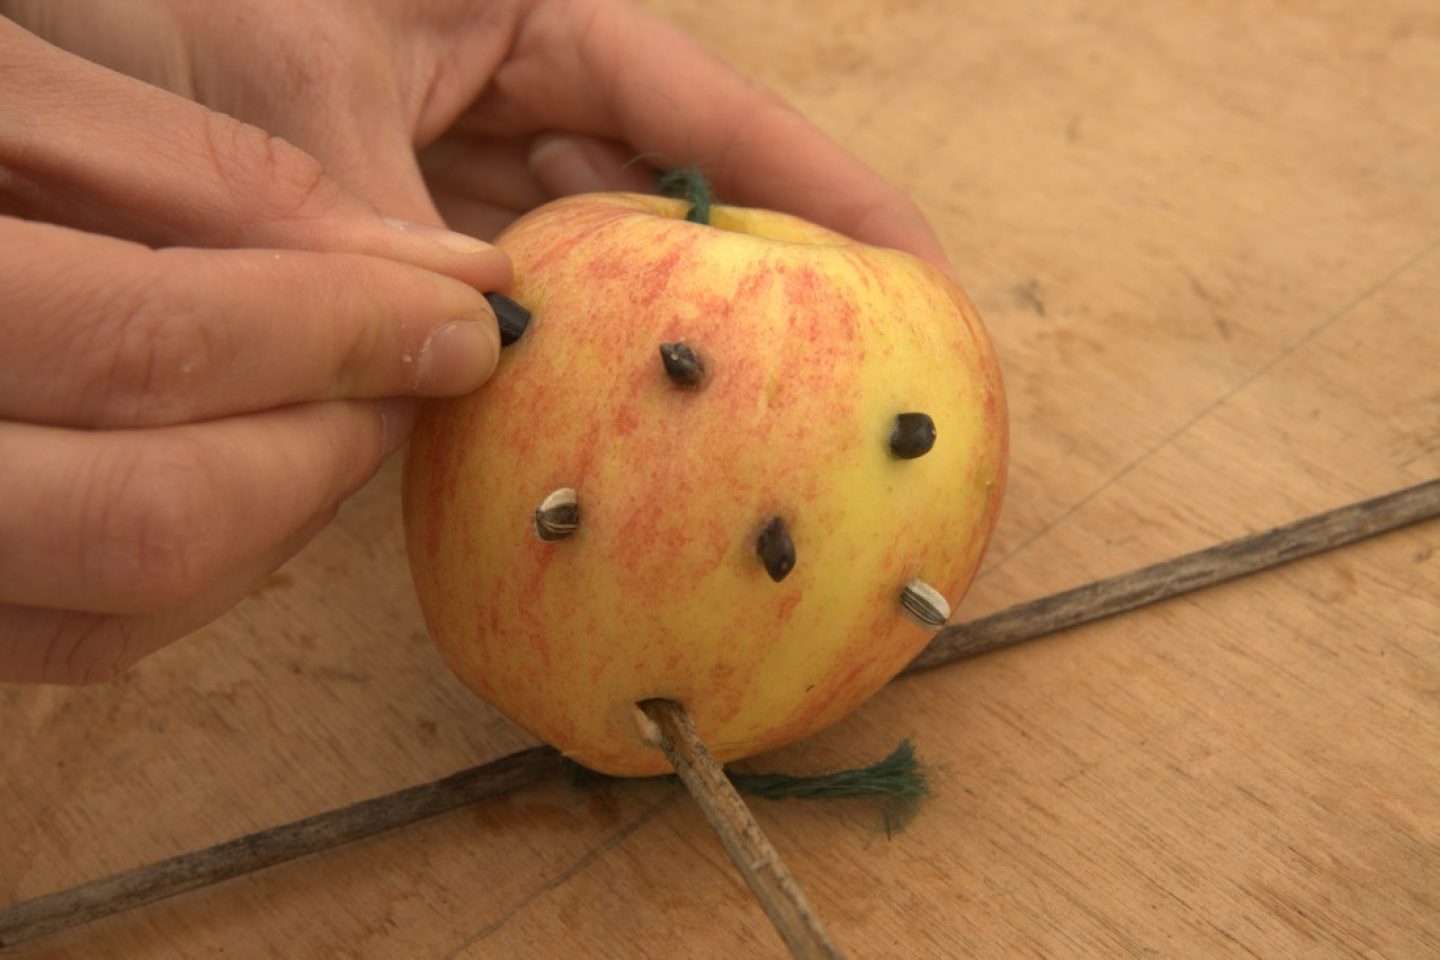 Sunflower seeds being poked all over an apple